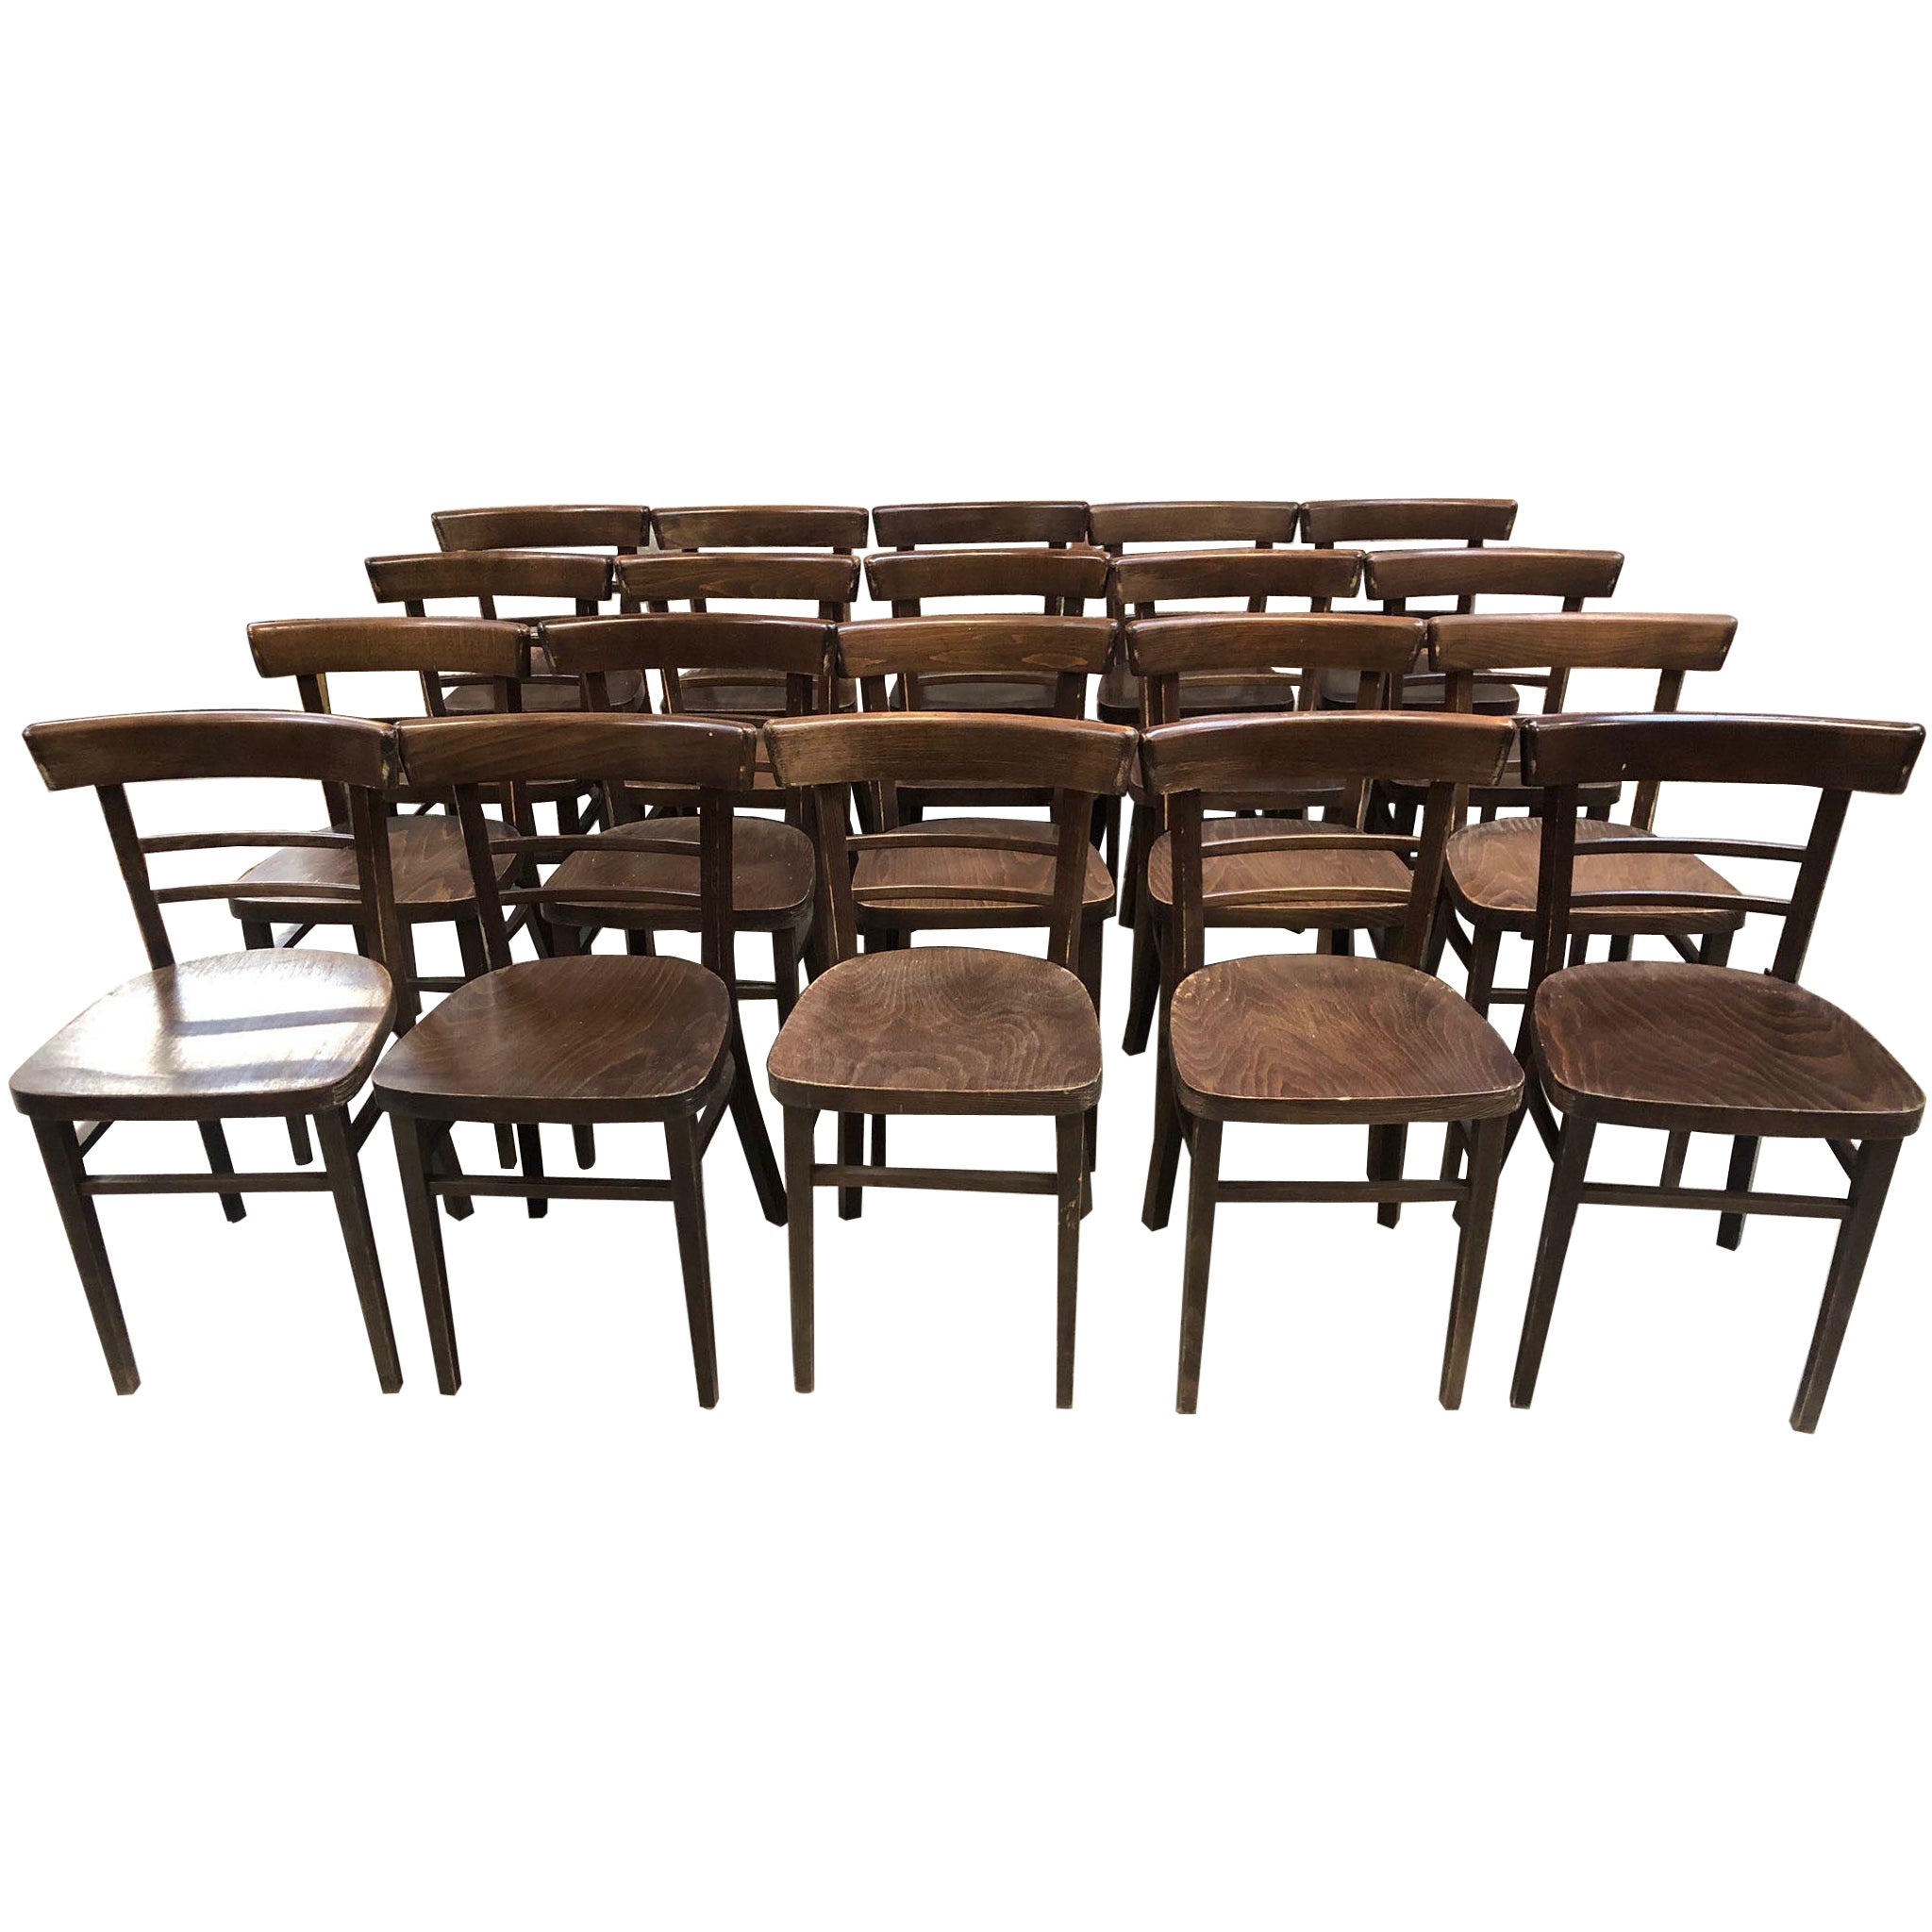 Classic bistro chairs